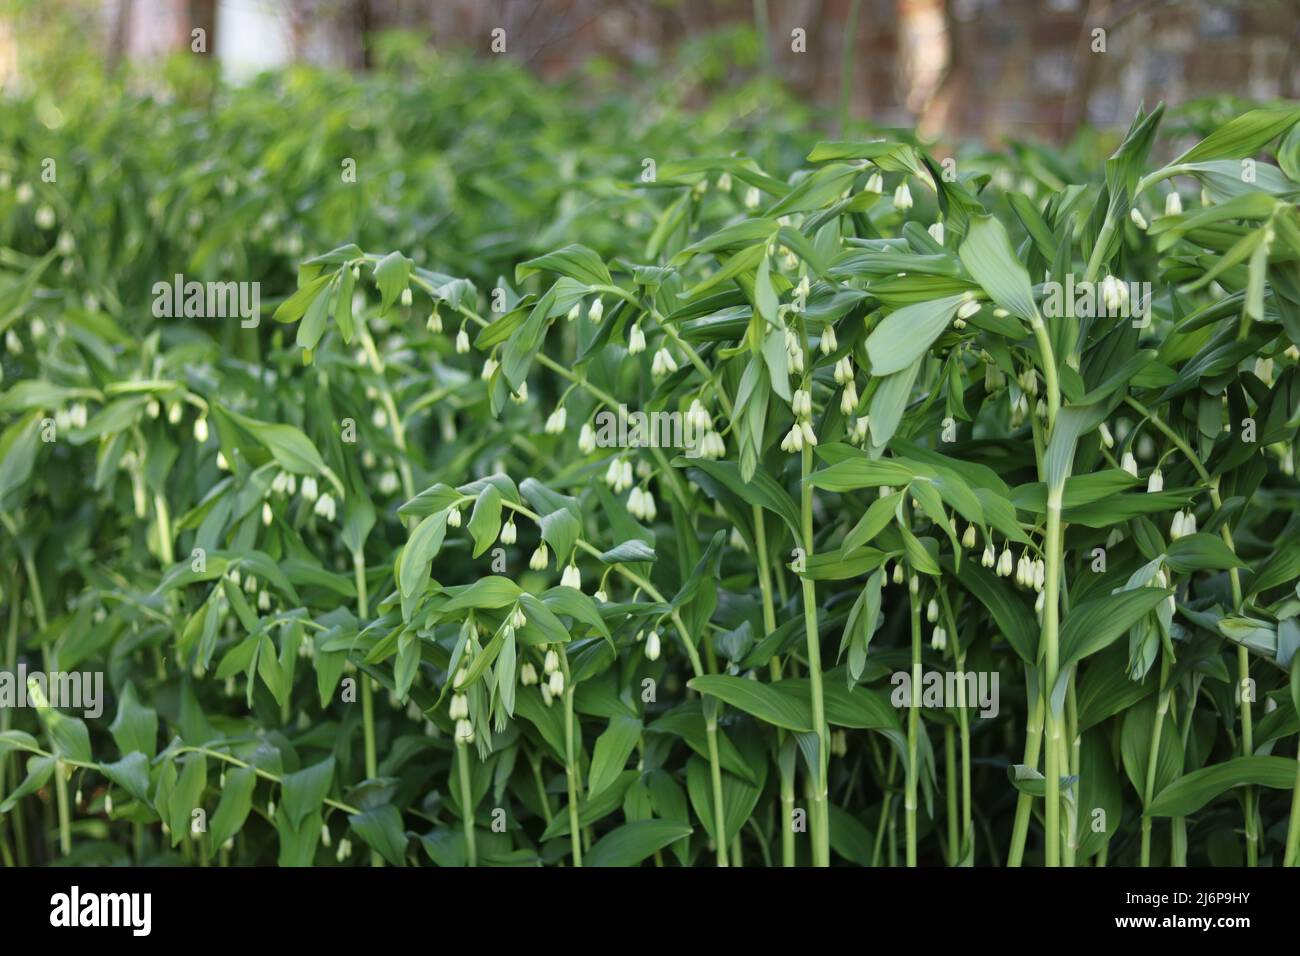 Full frame springtime image of polygonatum with wall in background Stock Photo